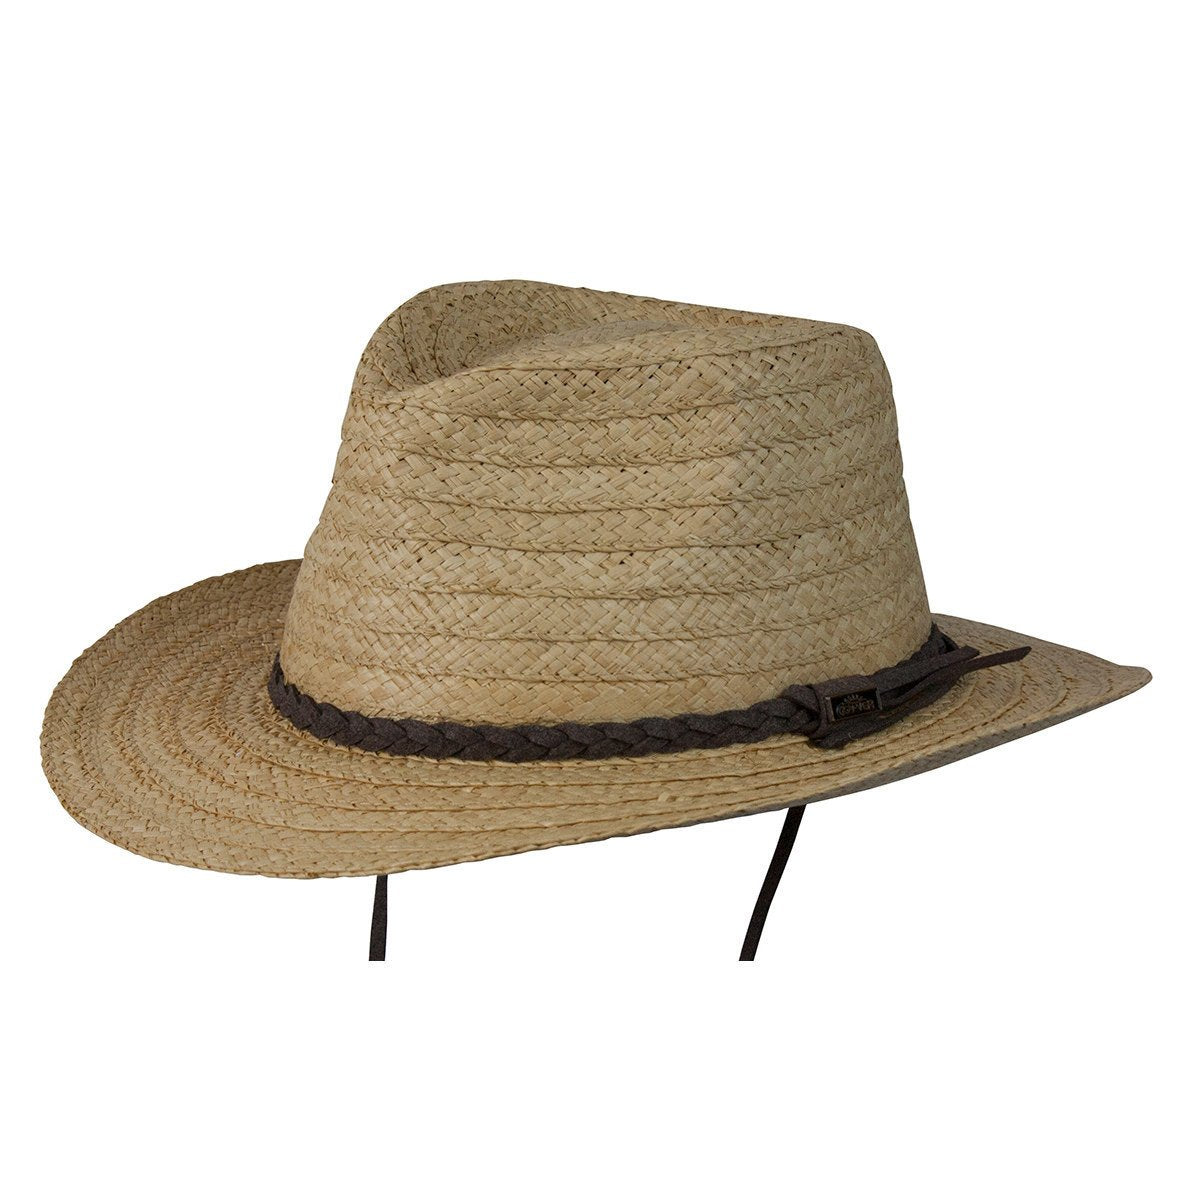 Conner Hats Outback Hats Natural / Small/Medium Myrtle Beach Organic Raffia Hat